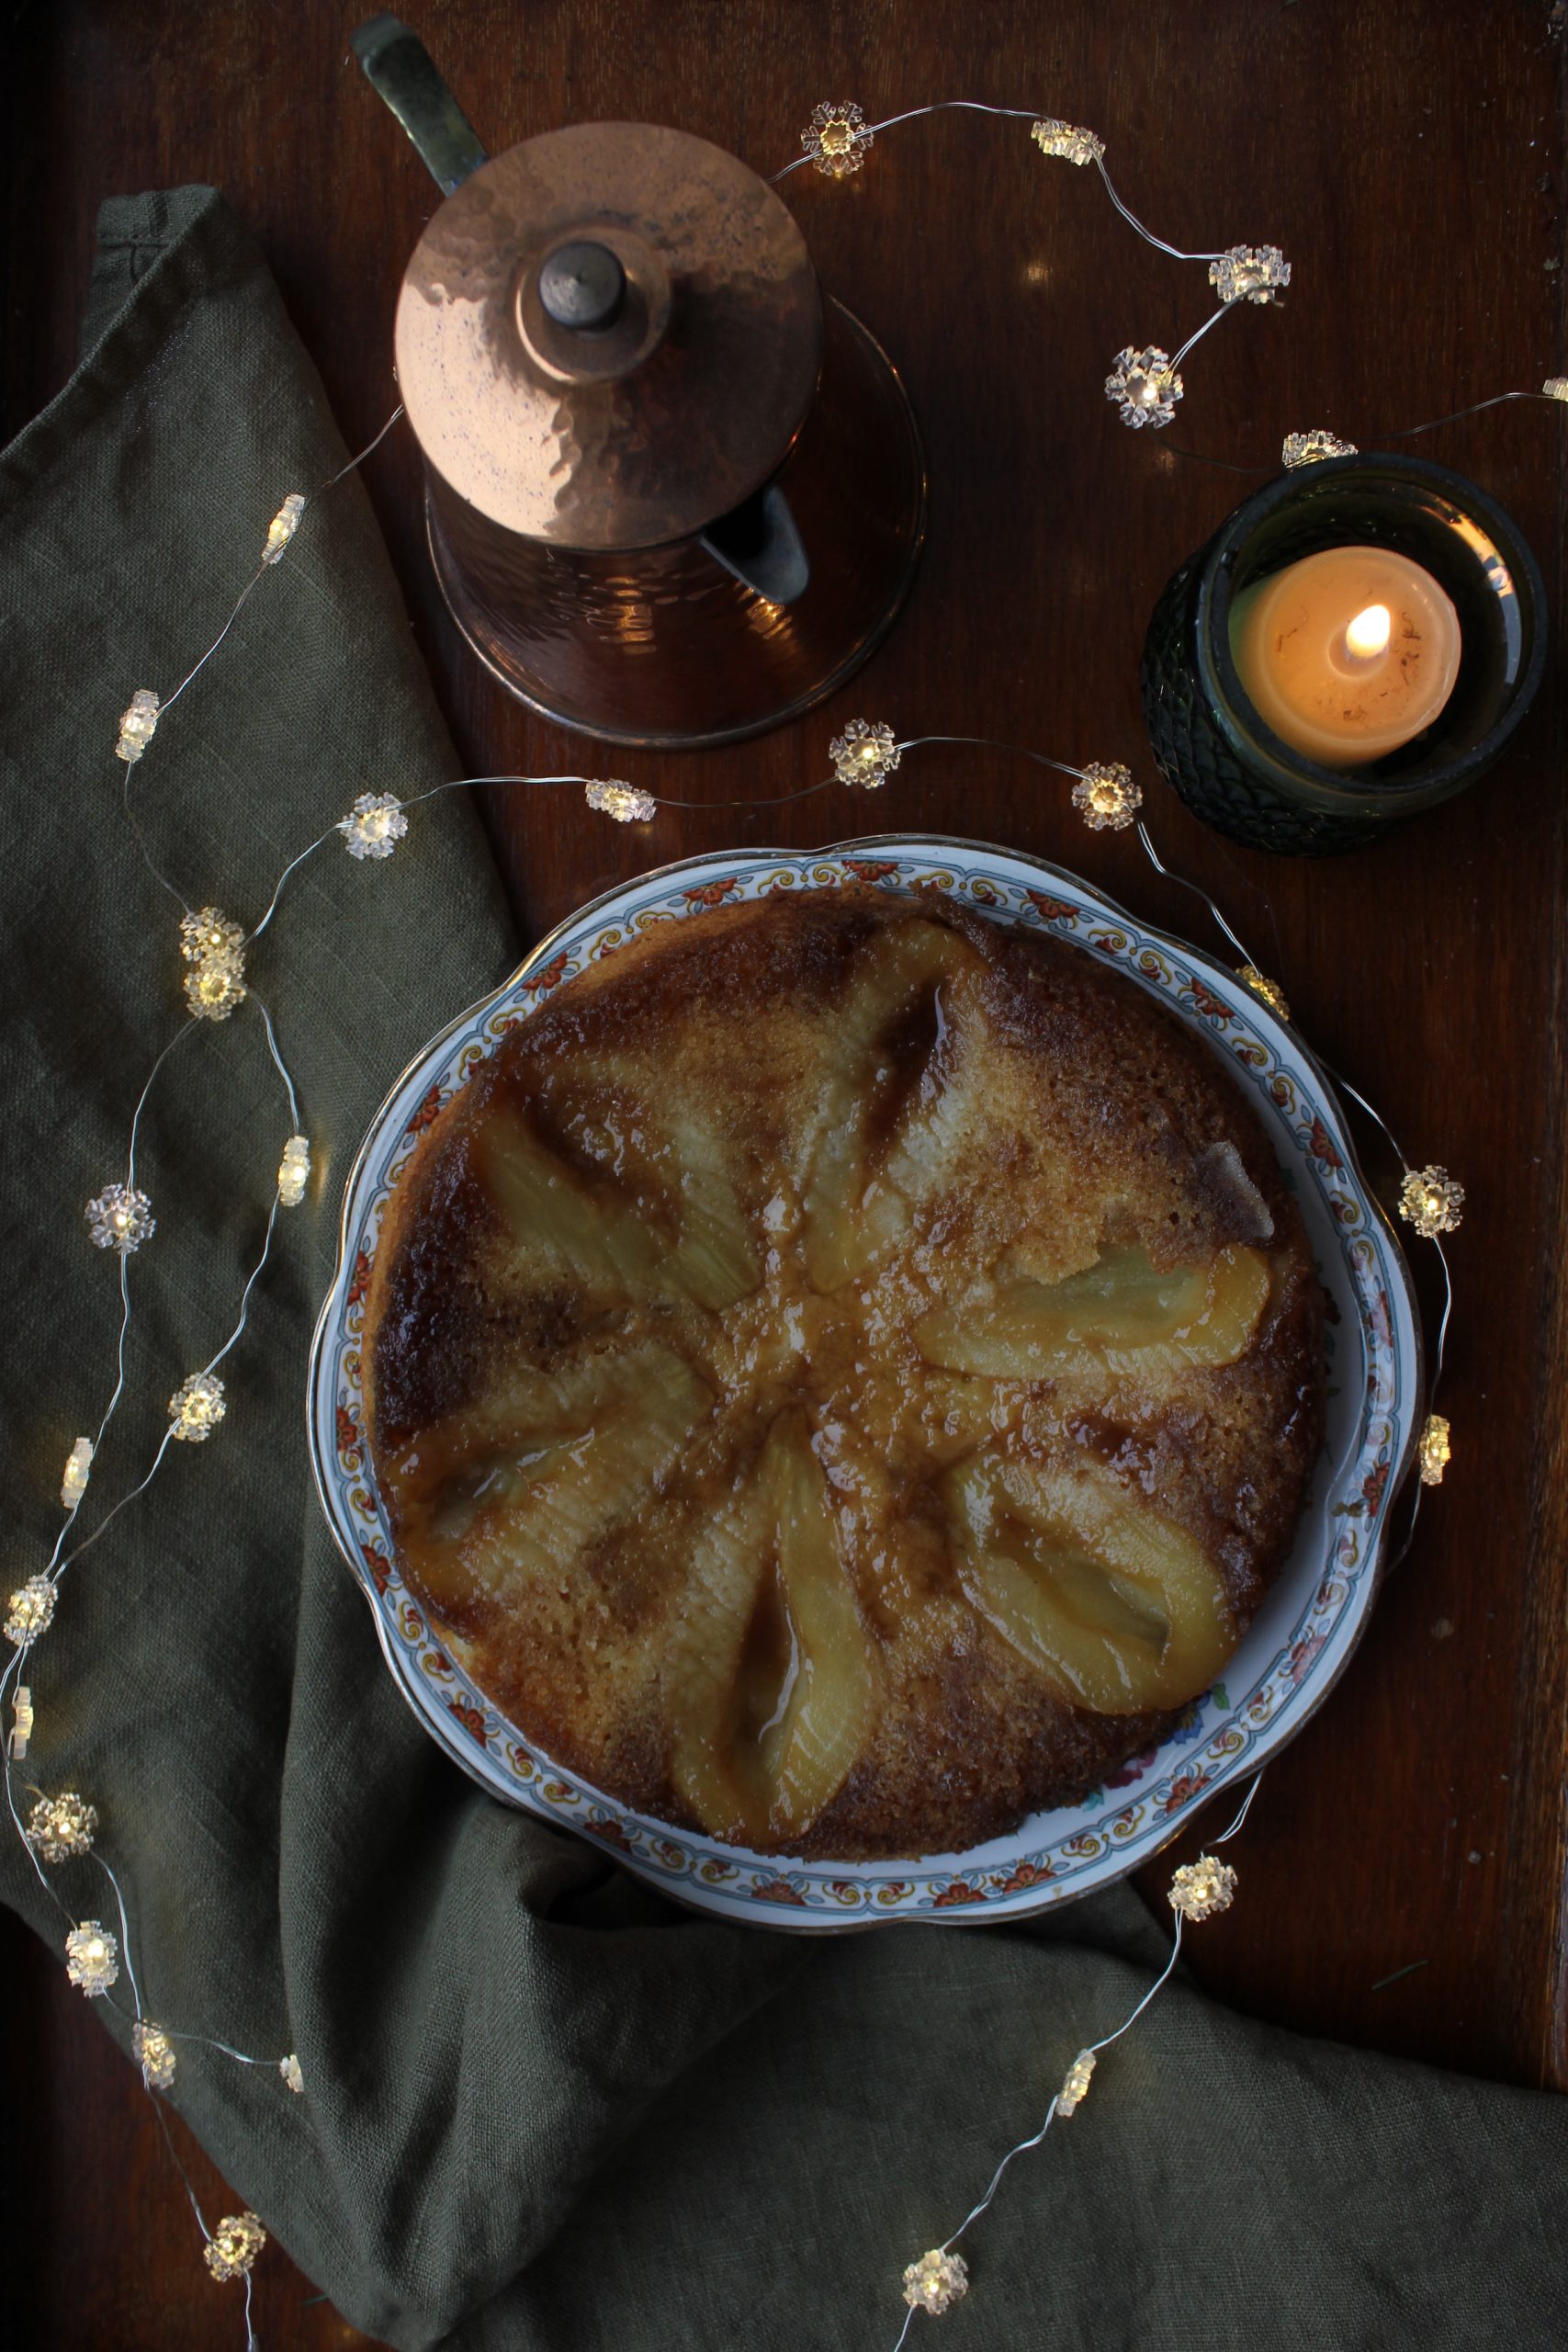 Pear and Ginger Upside-down Cake